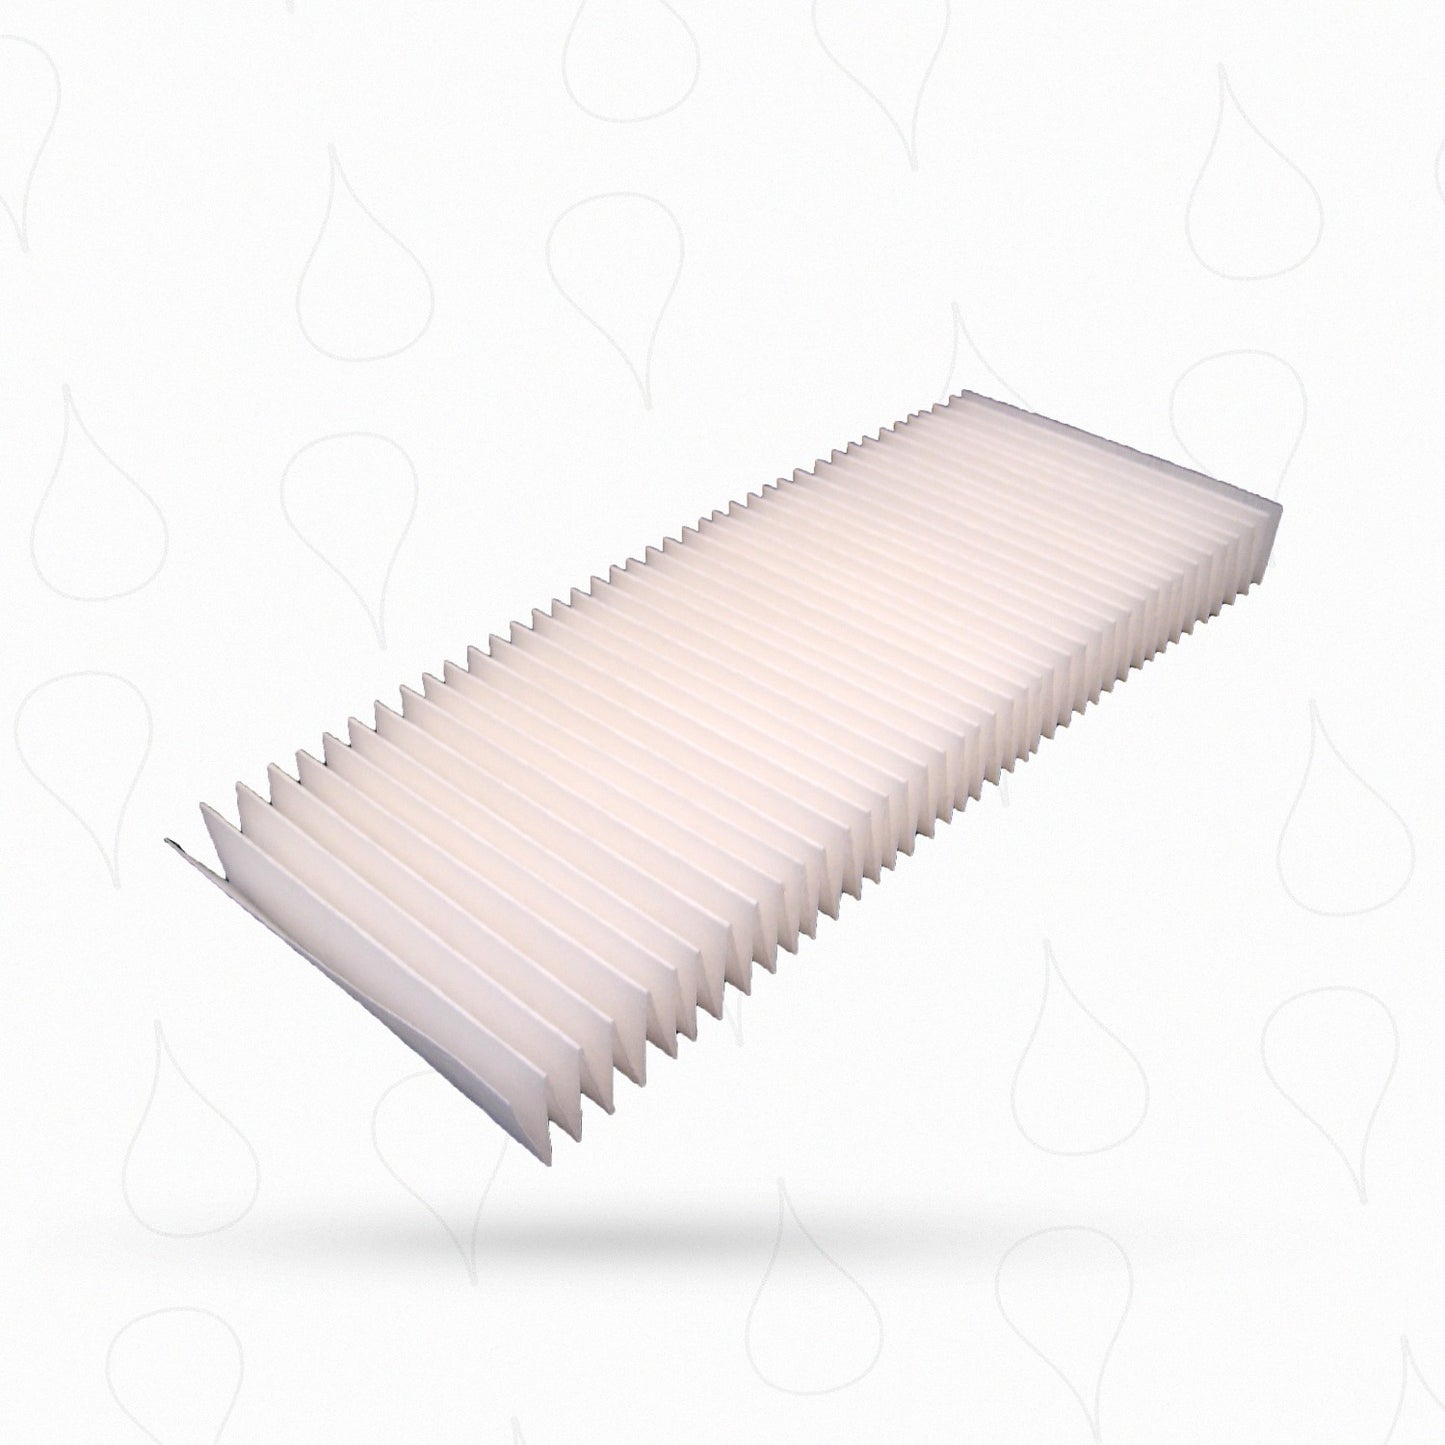 The filters can be used several times and are packed separately sealed in the boxes.  The filters are made of polyester cellulose and are suitable for cooling lubricants and aqueous solutions